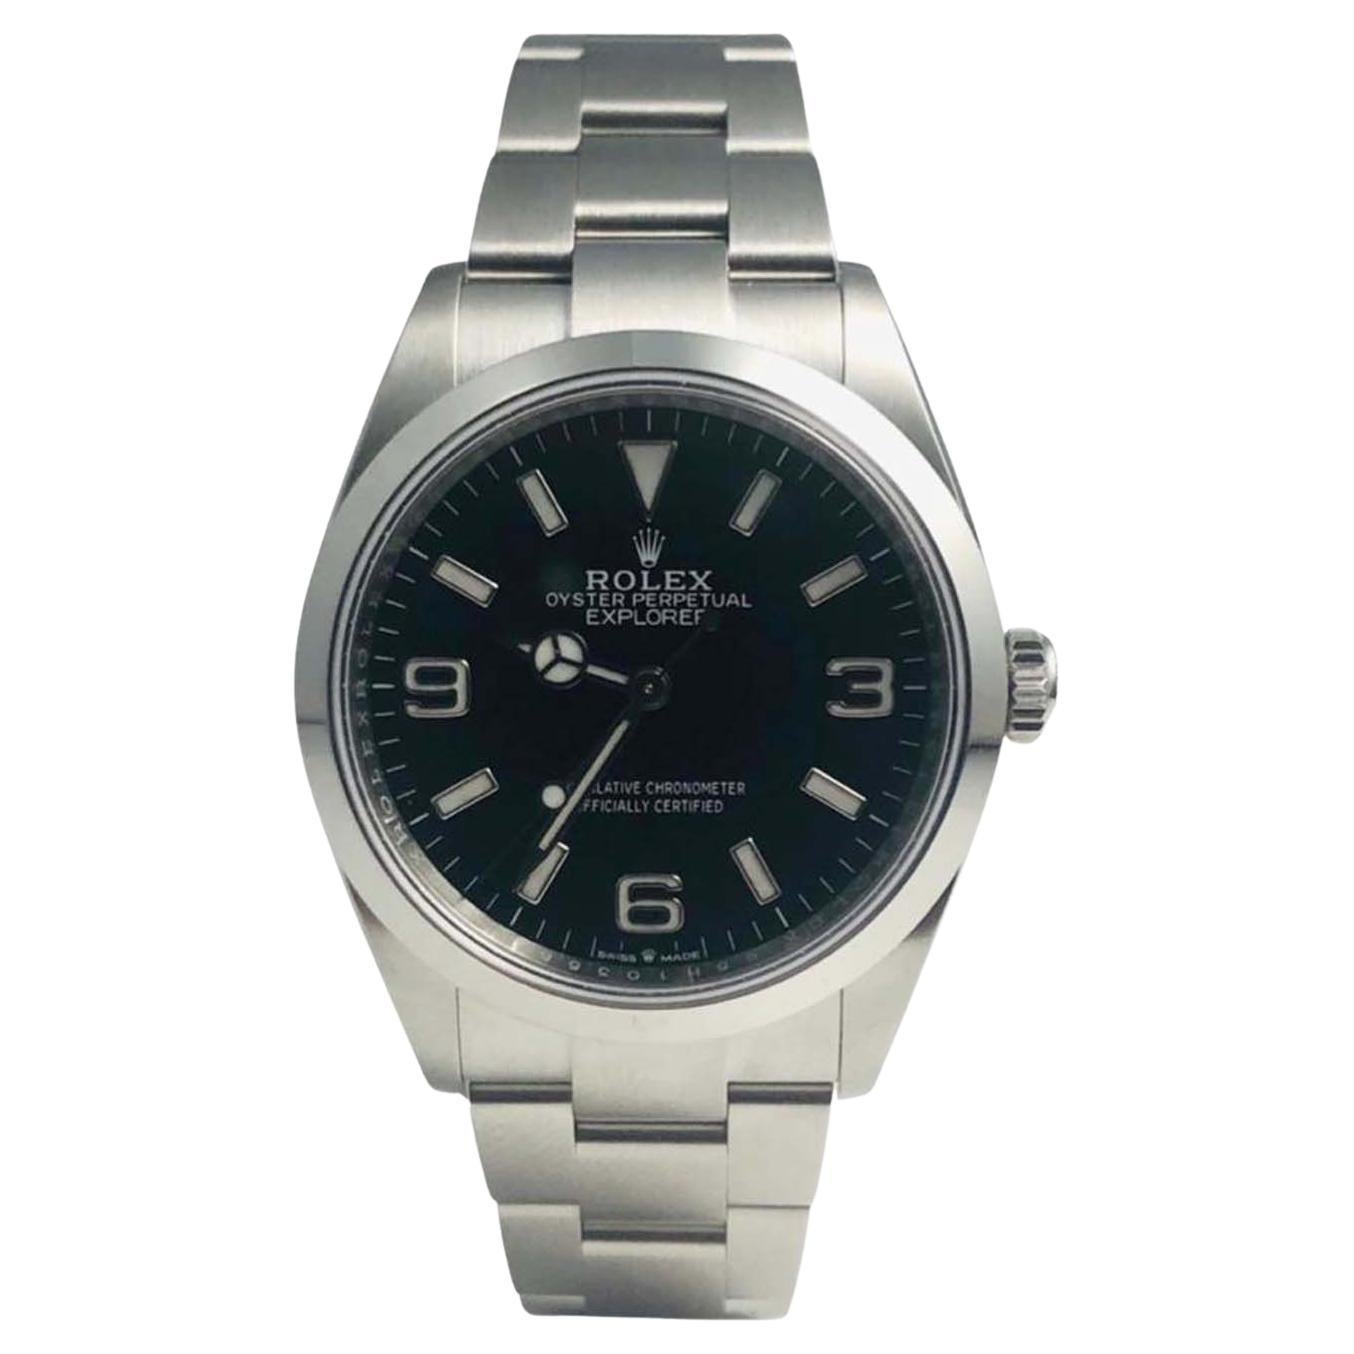 Rolex Explorer I Stainless Steel Black Dial Ref. 124270 Watch For Sale